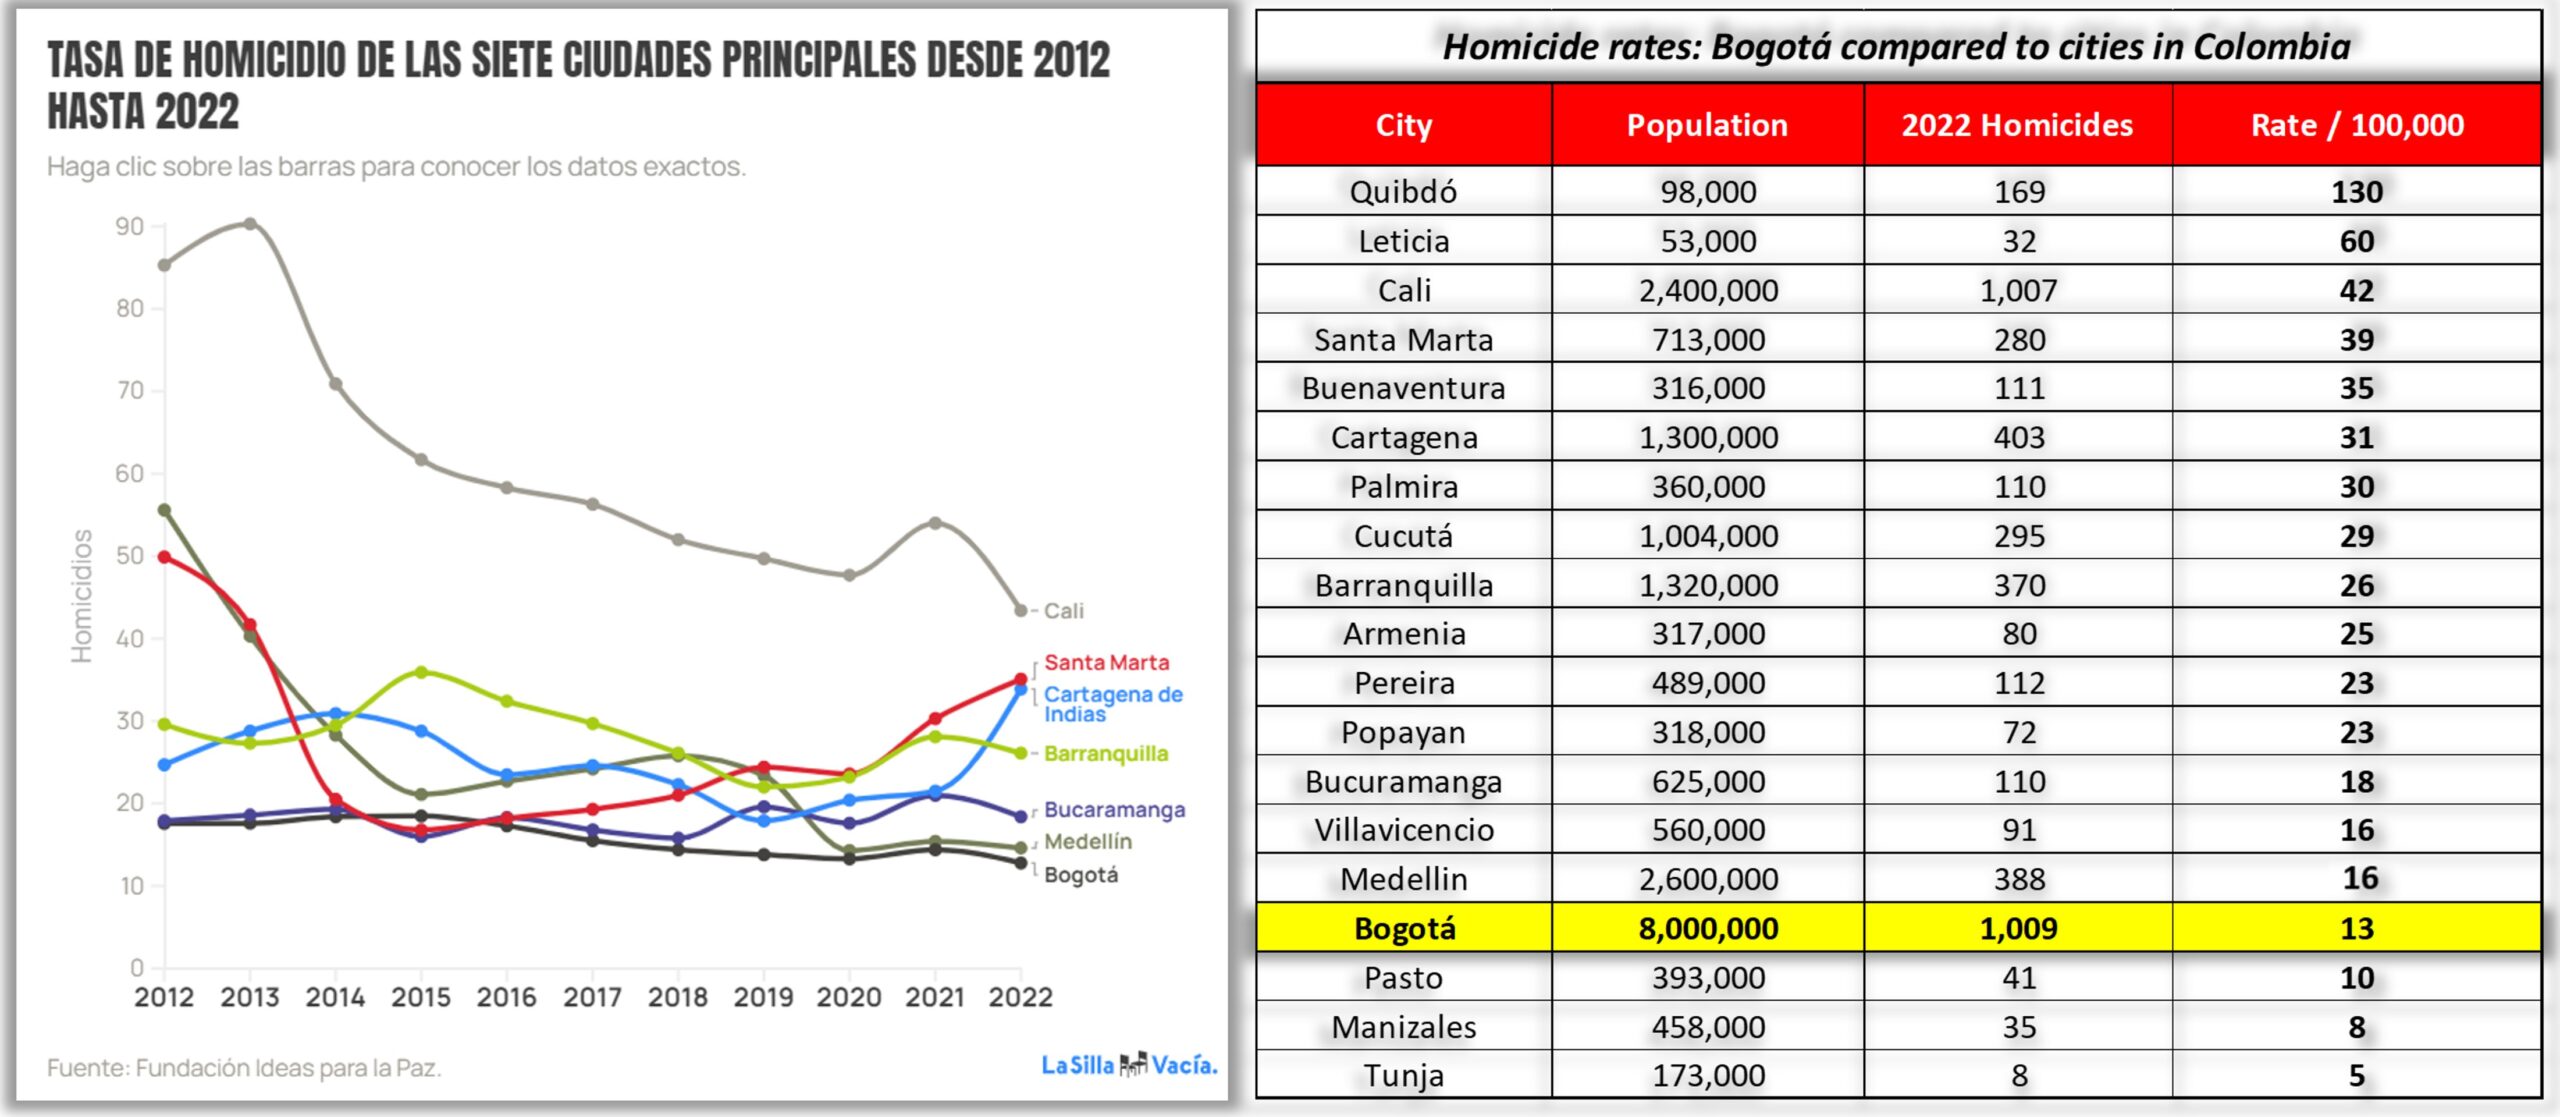 Trends in homicide rates in seven Colombian cities over 10 years, left, and homicides reported in main cities for 2022, right. Bogotá is safer than most urban areas. Note the recent rise in murders on the graph for Santa Marta and Cartagena. 